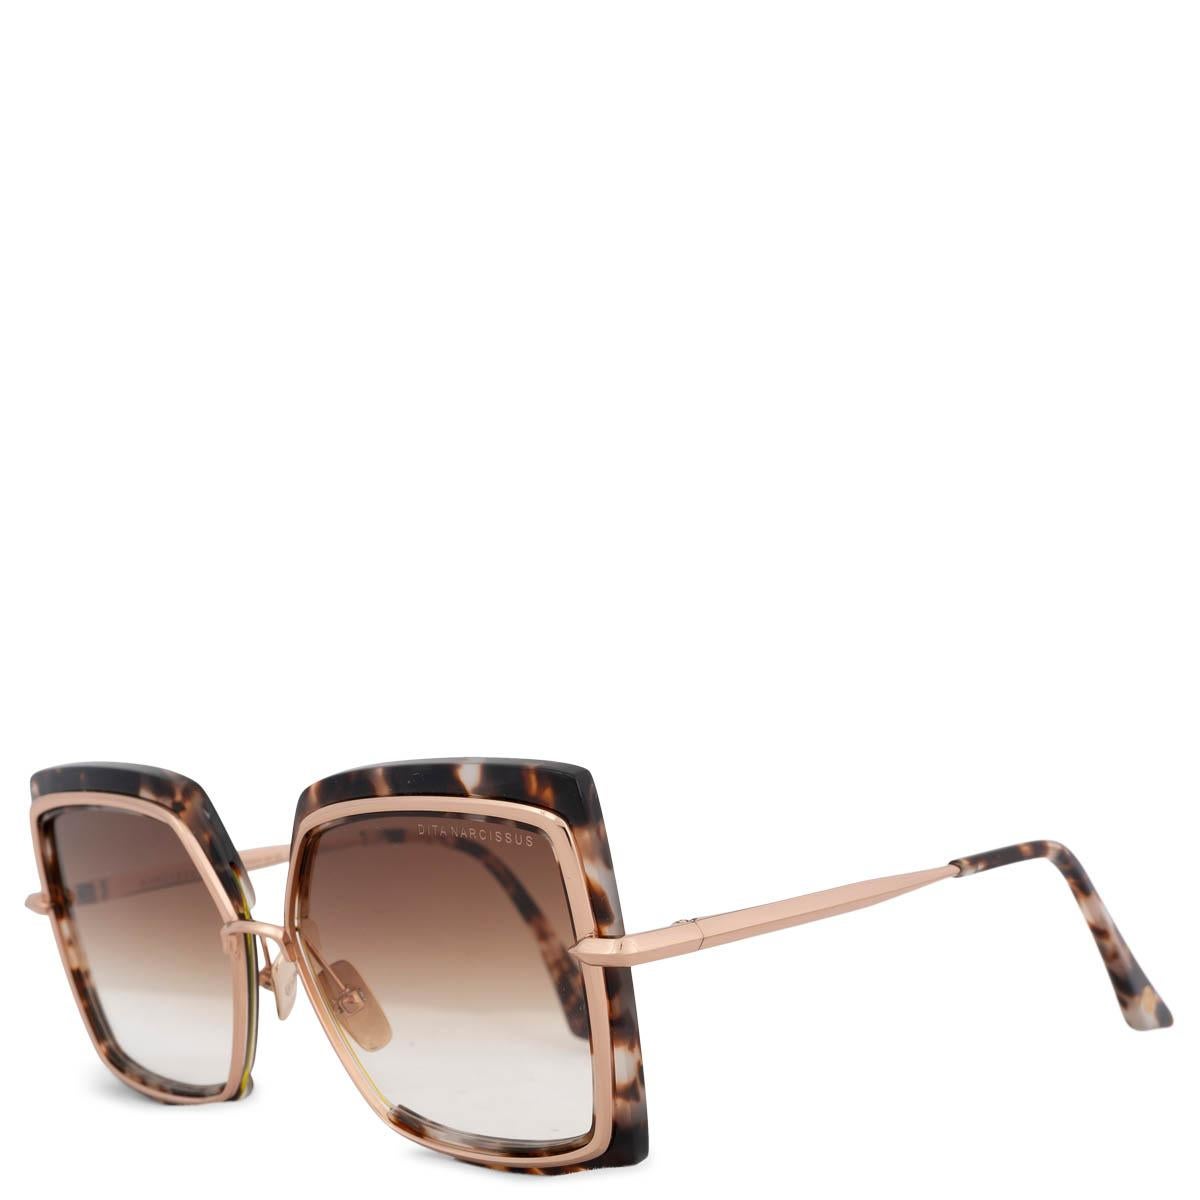 100% authentic Dita Narcissus tortoiseshell square frame acetate und rose gold metal sunglasses with brown gradient lenses. Have been worn and are in excellent condition. Come without case. 

Measurements
Model	DTS503-58-02
Width	14cm